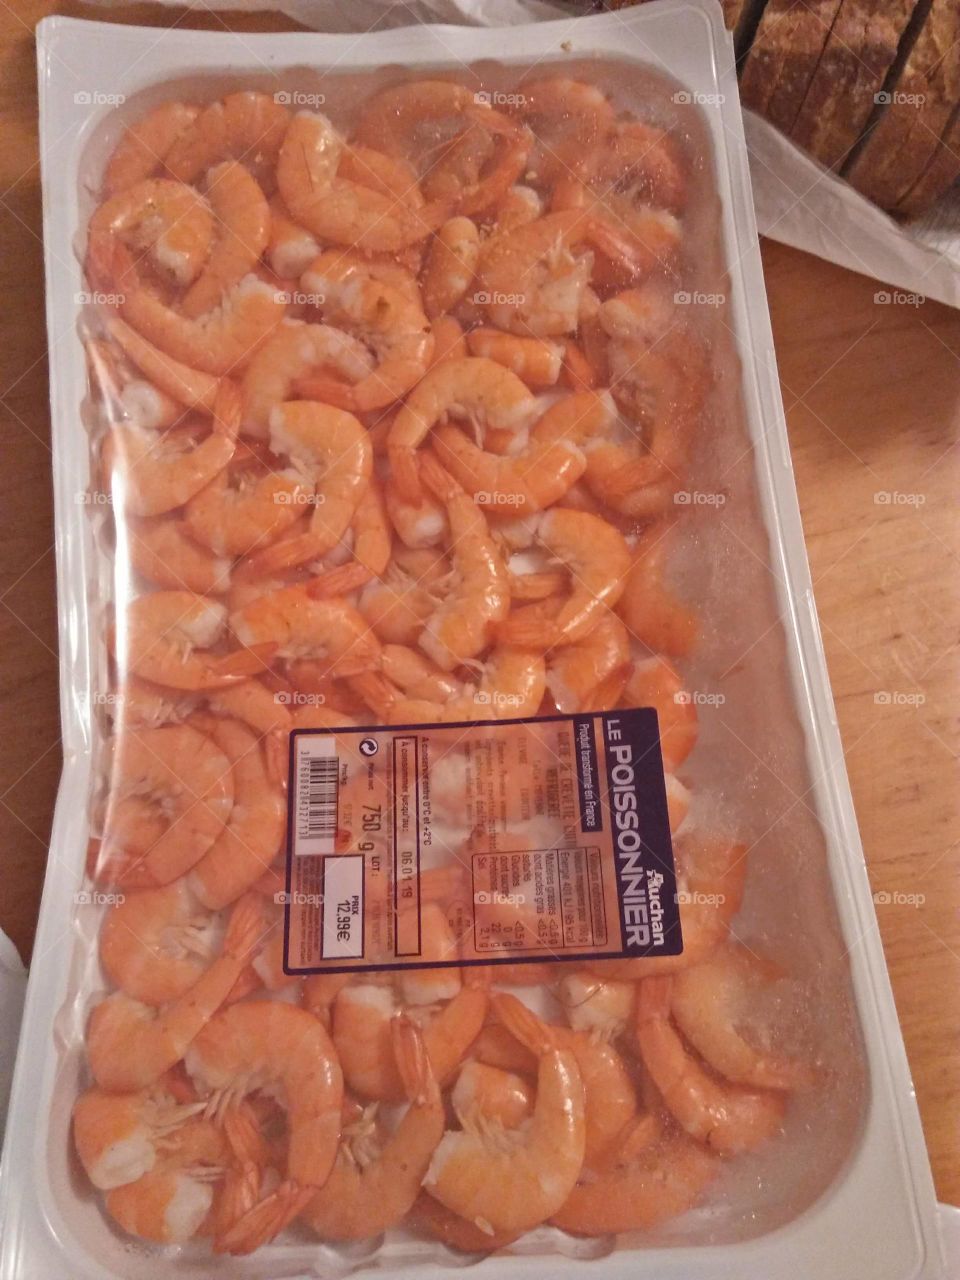 shrimp bought from the market